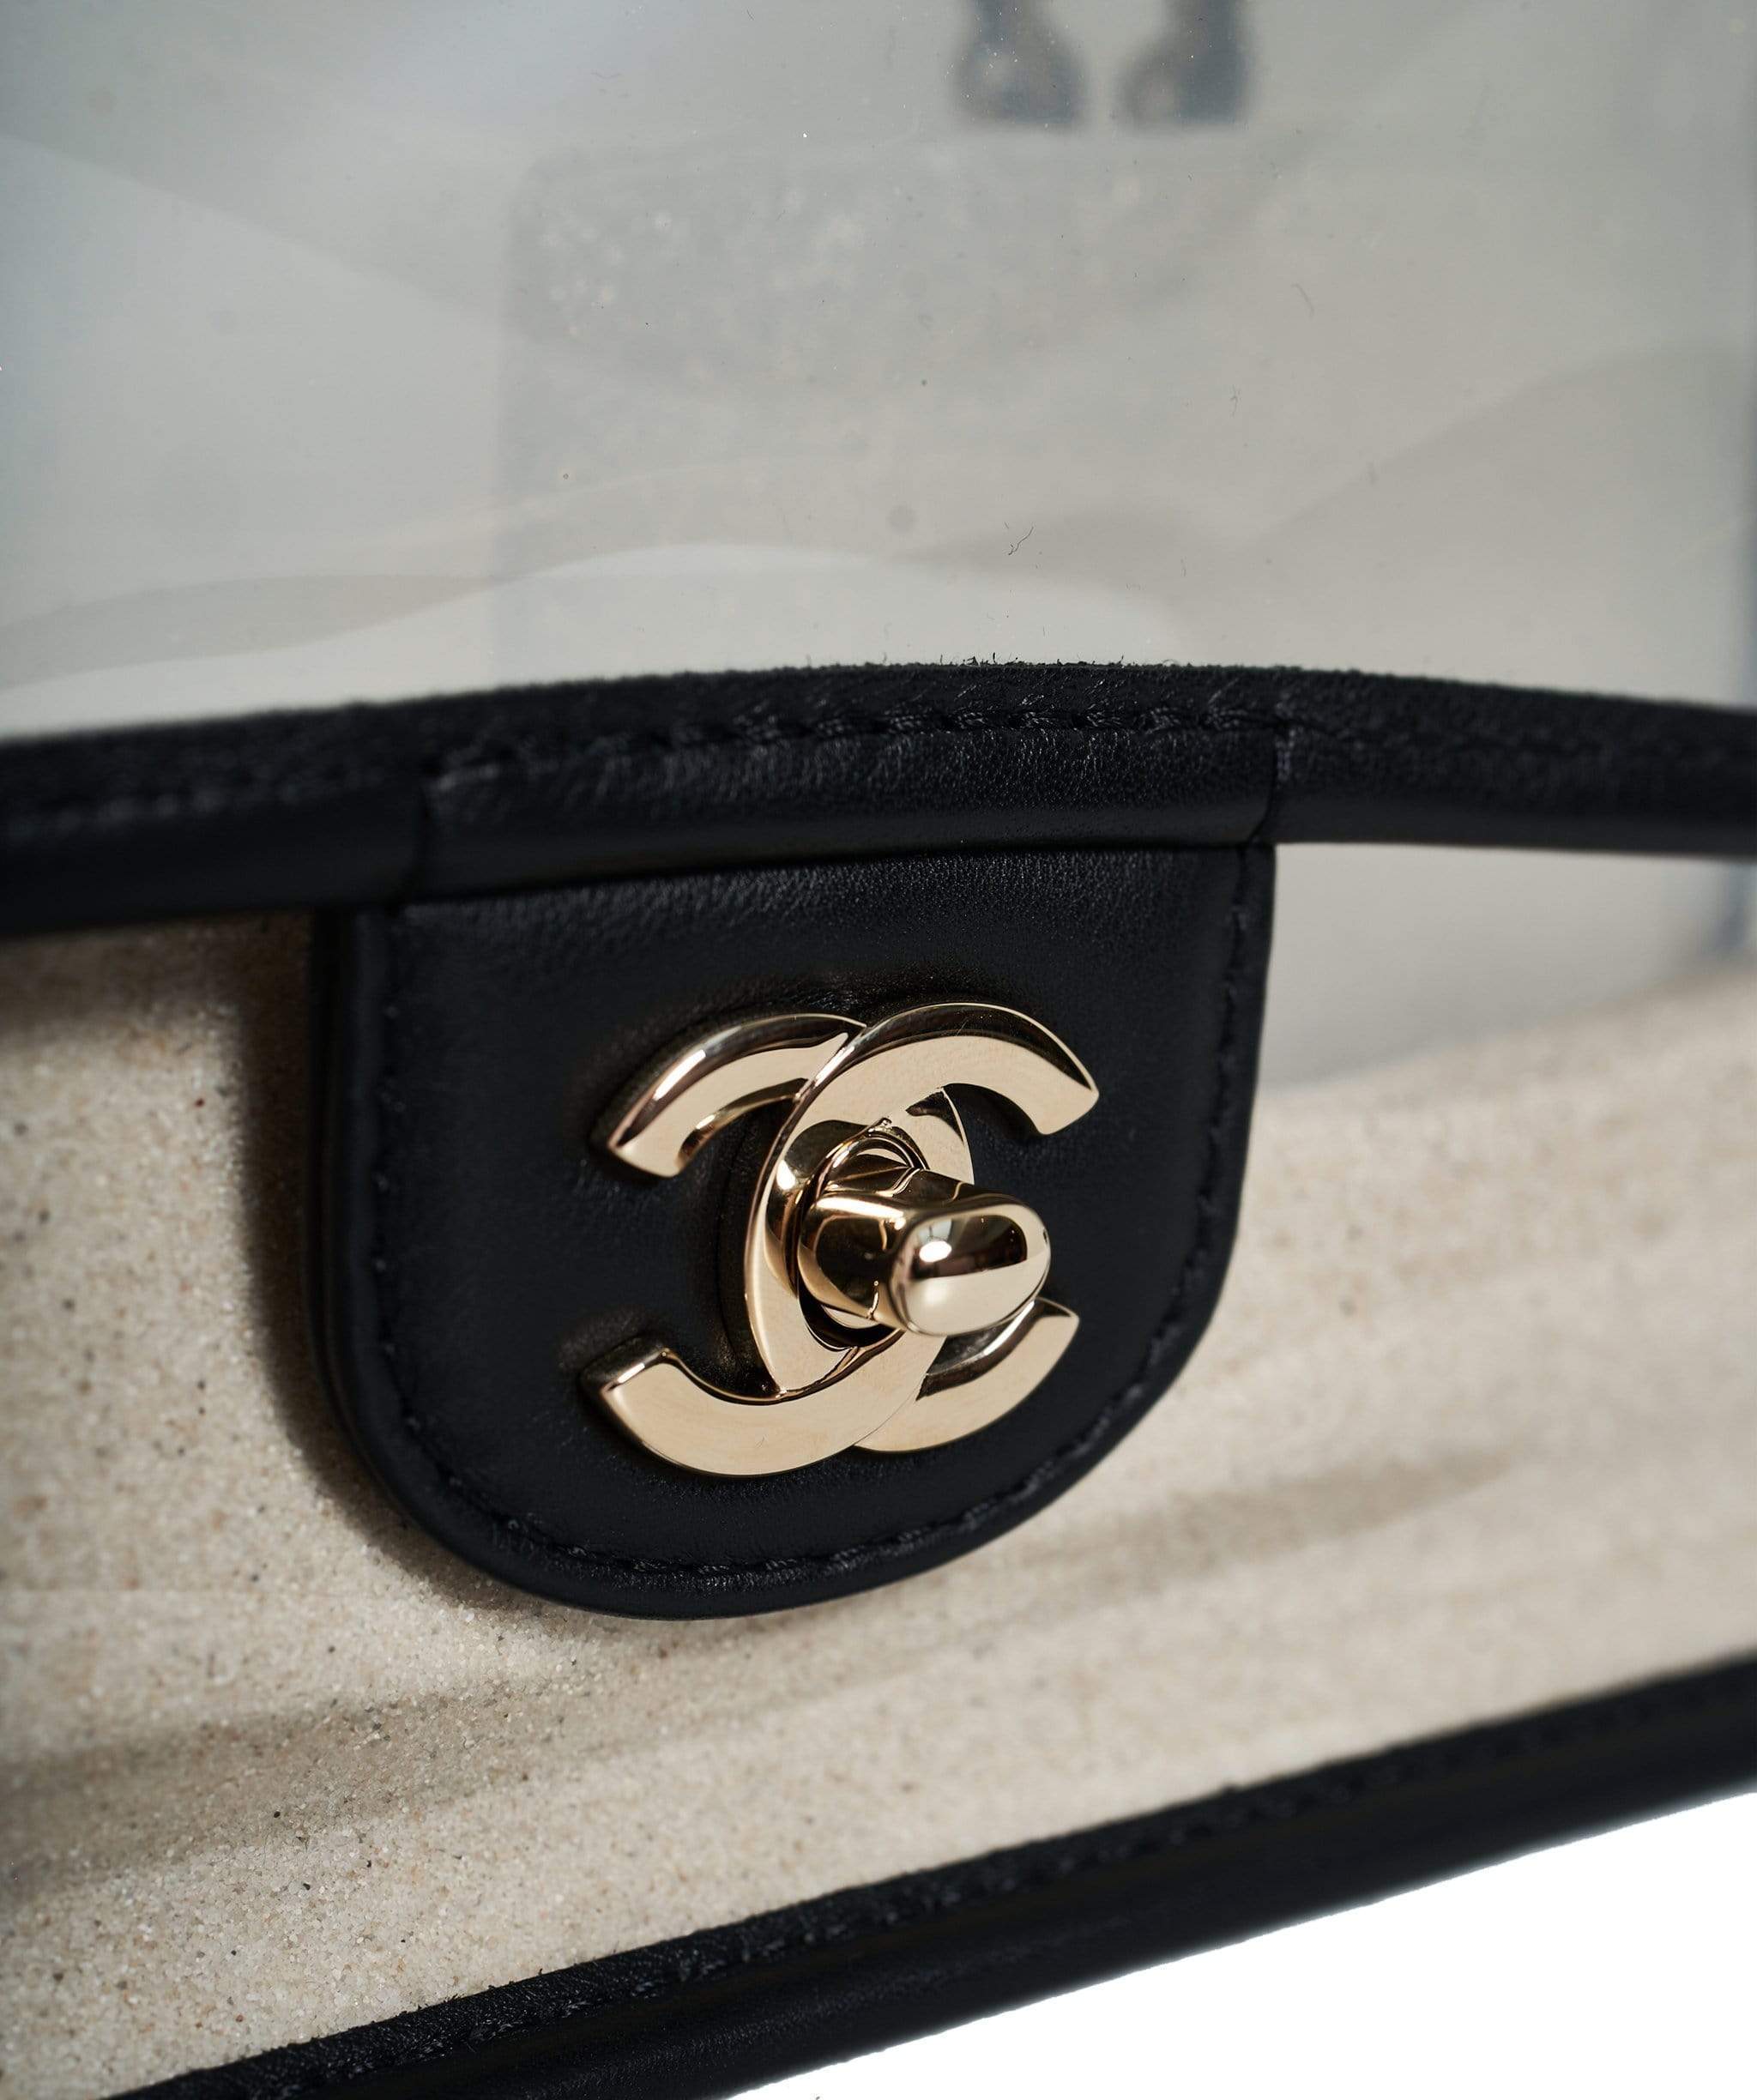 Chanel Chanel flap bag Sand by the Sea - ASL1801